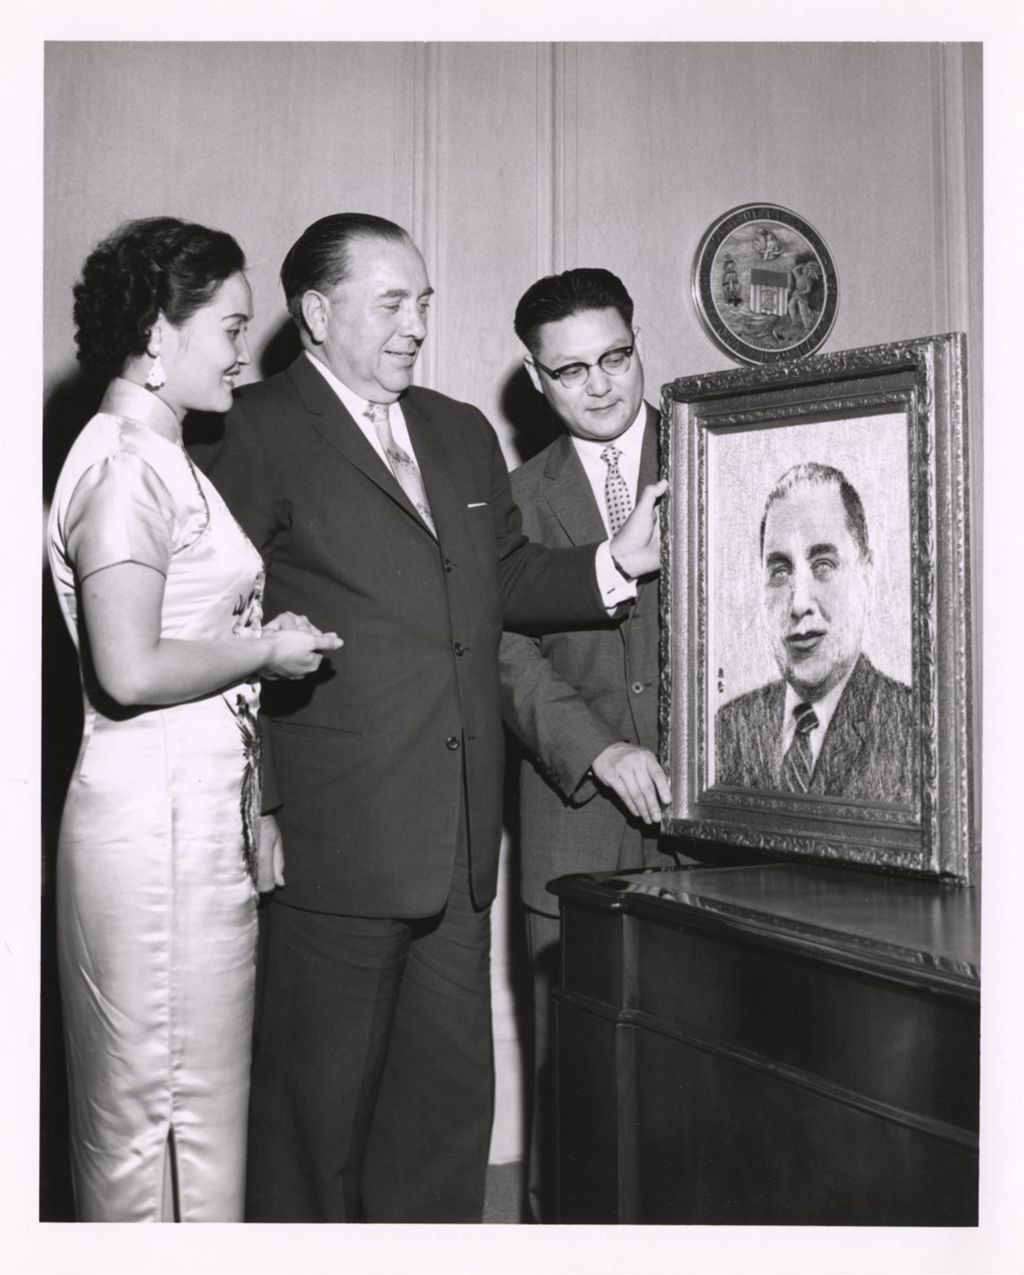 Miniature of Richard J. Daley and others with gift portrait